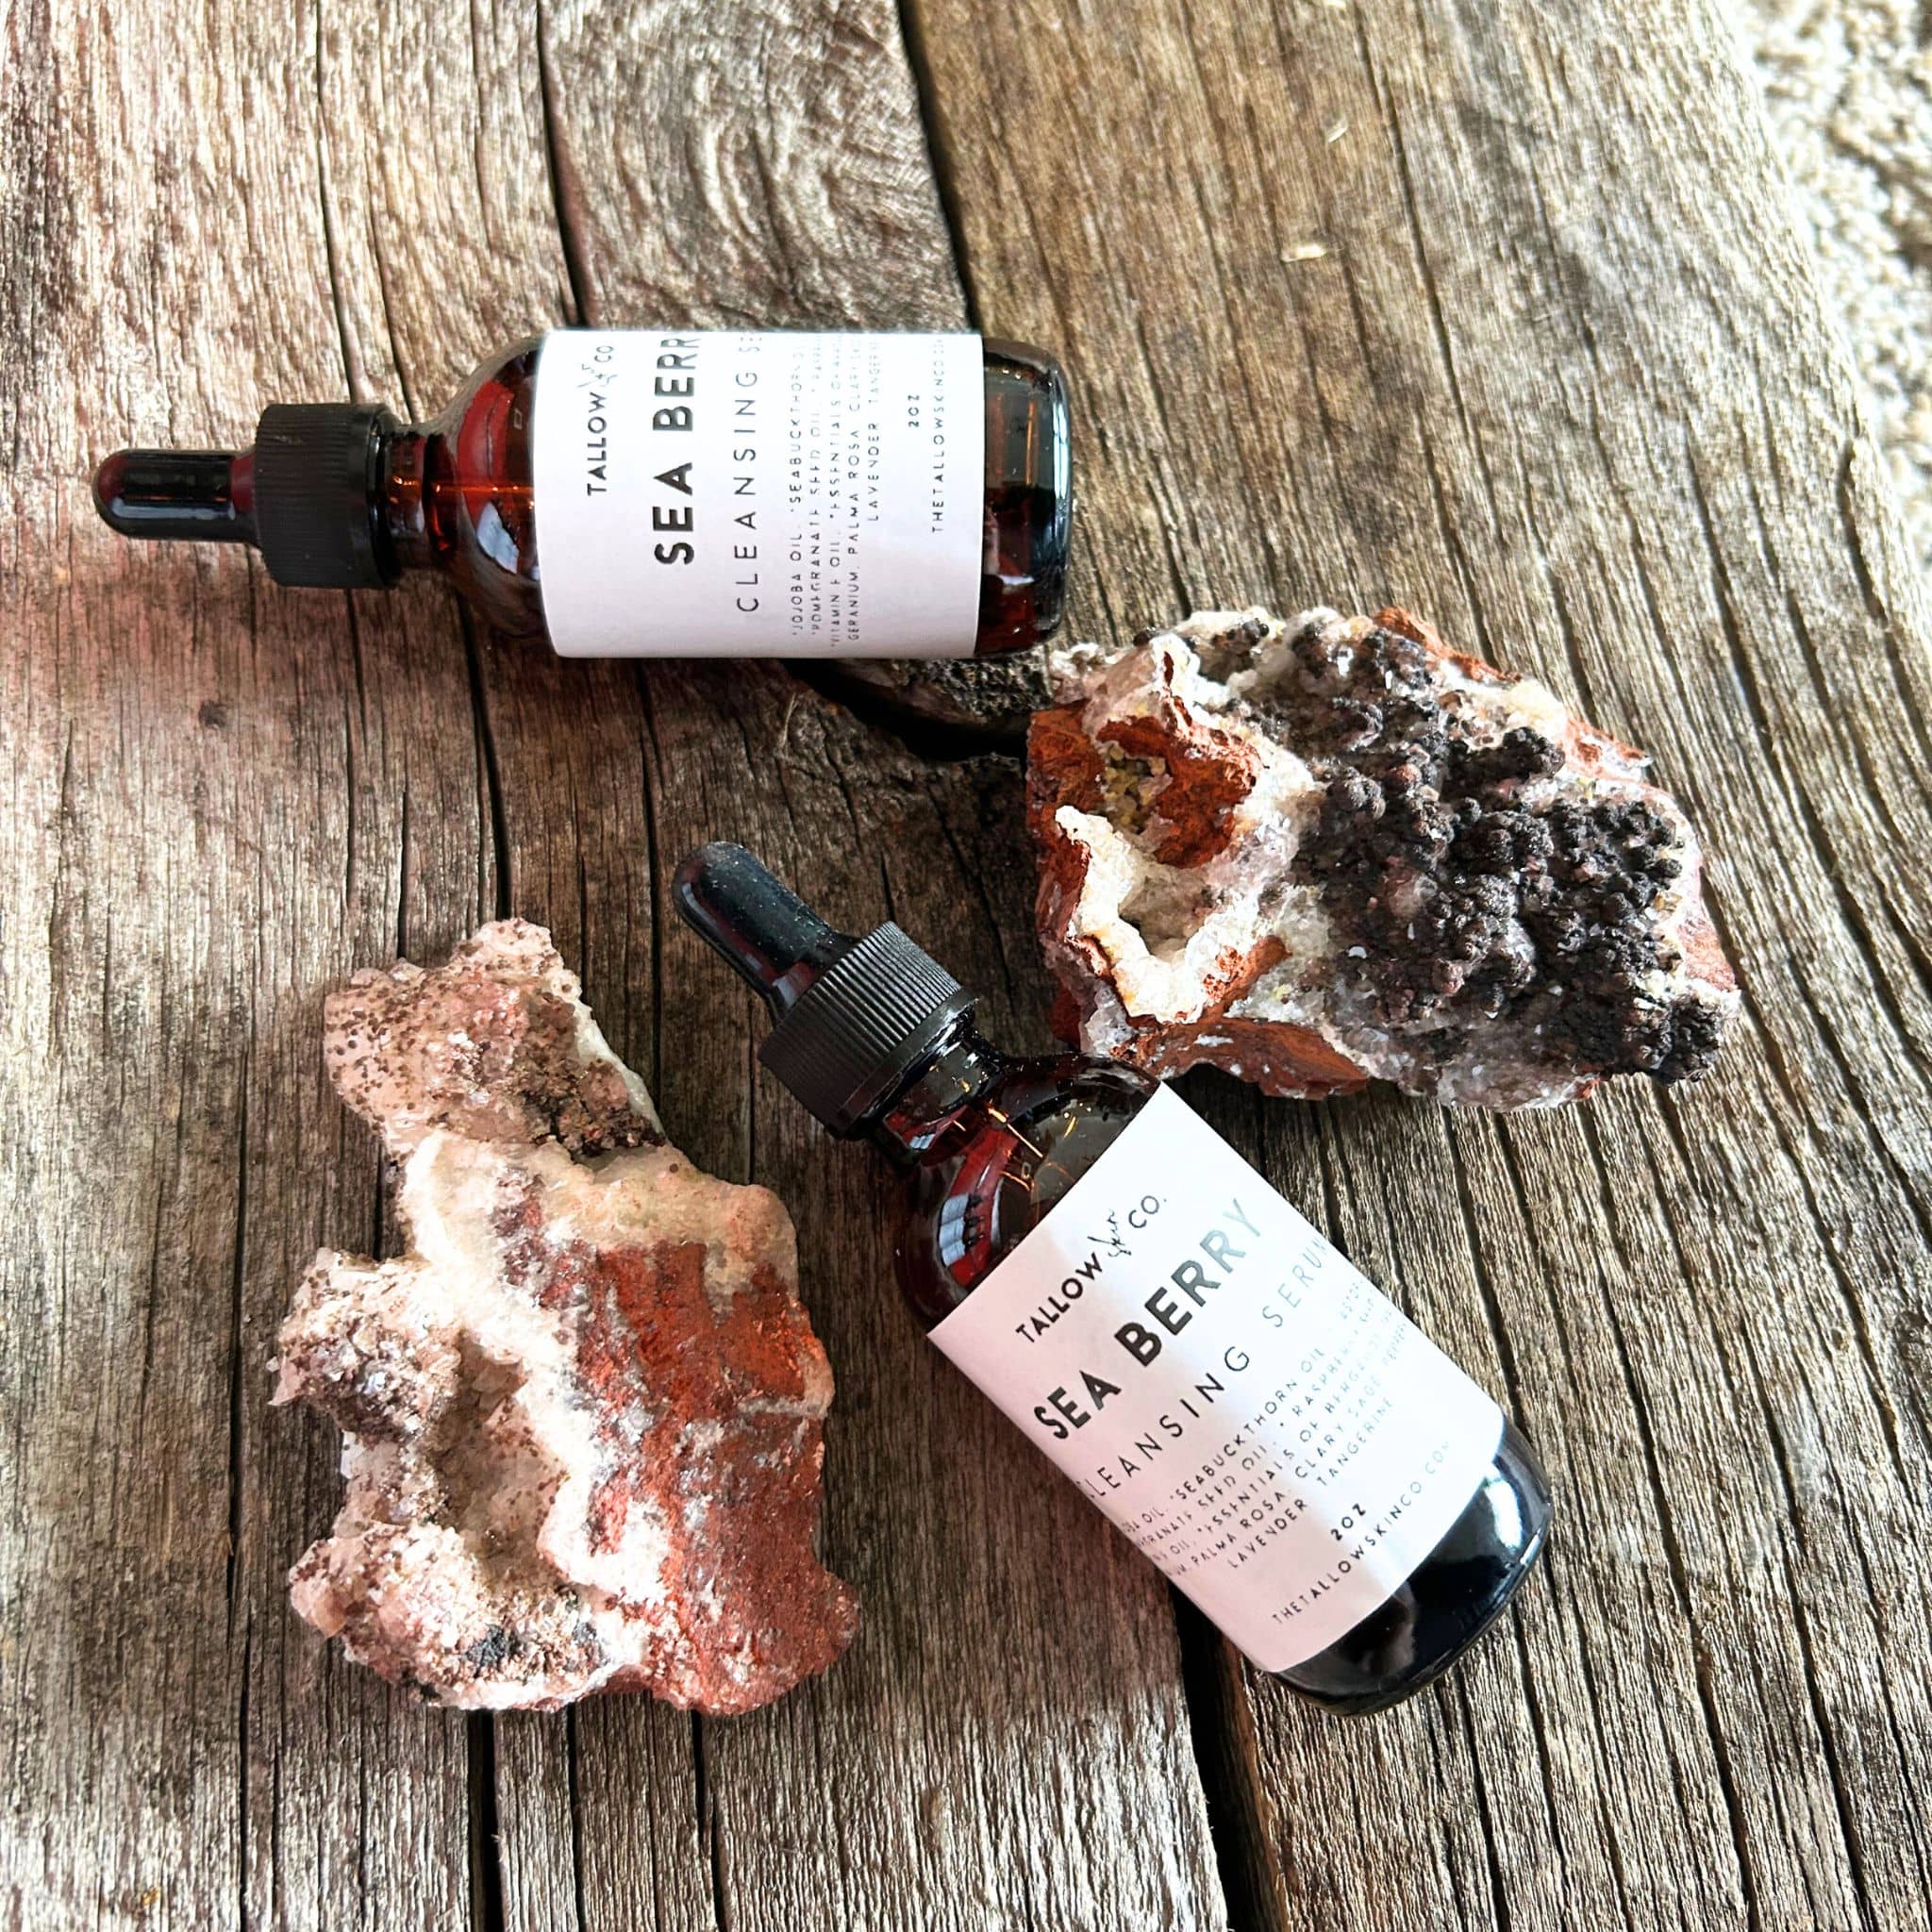 Sea buckthorn oil cleanser laying on barn wood between crystals.